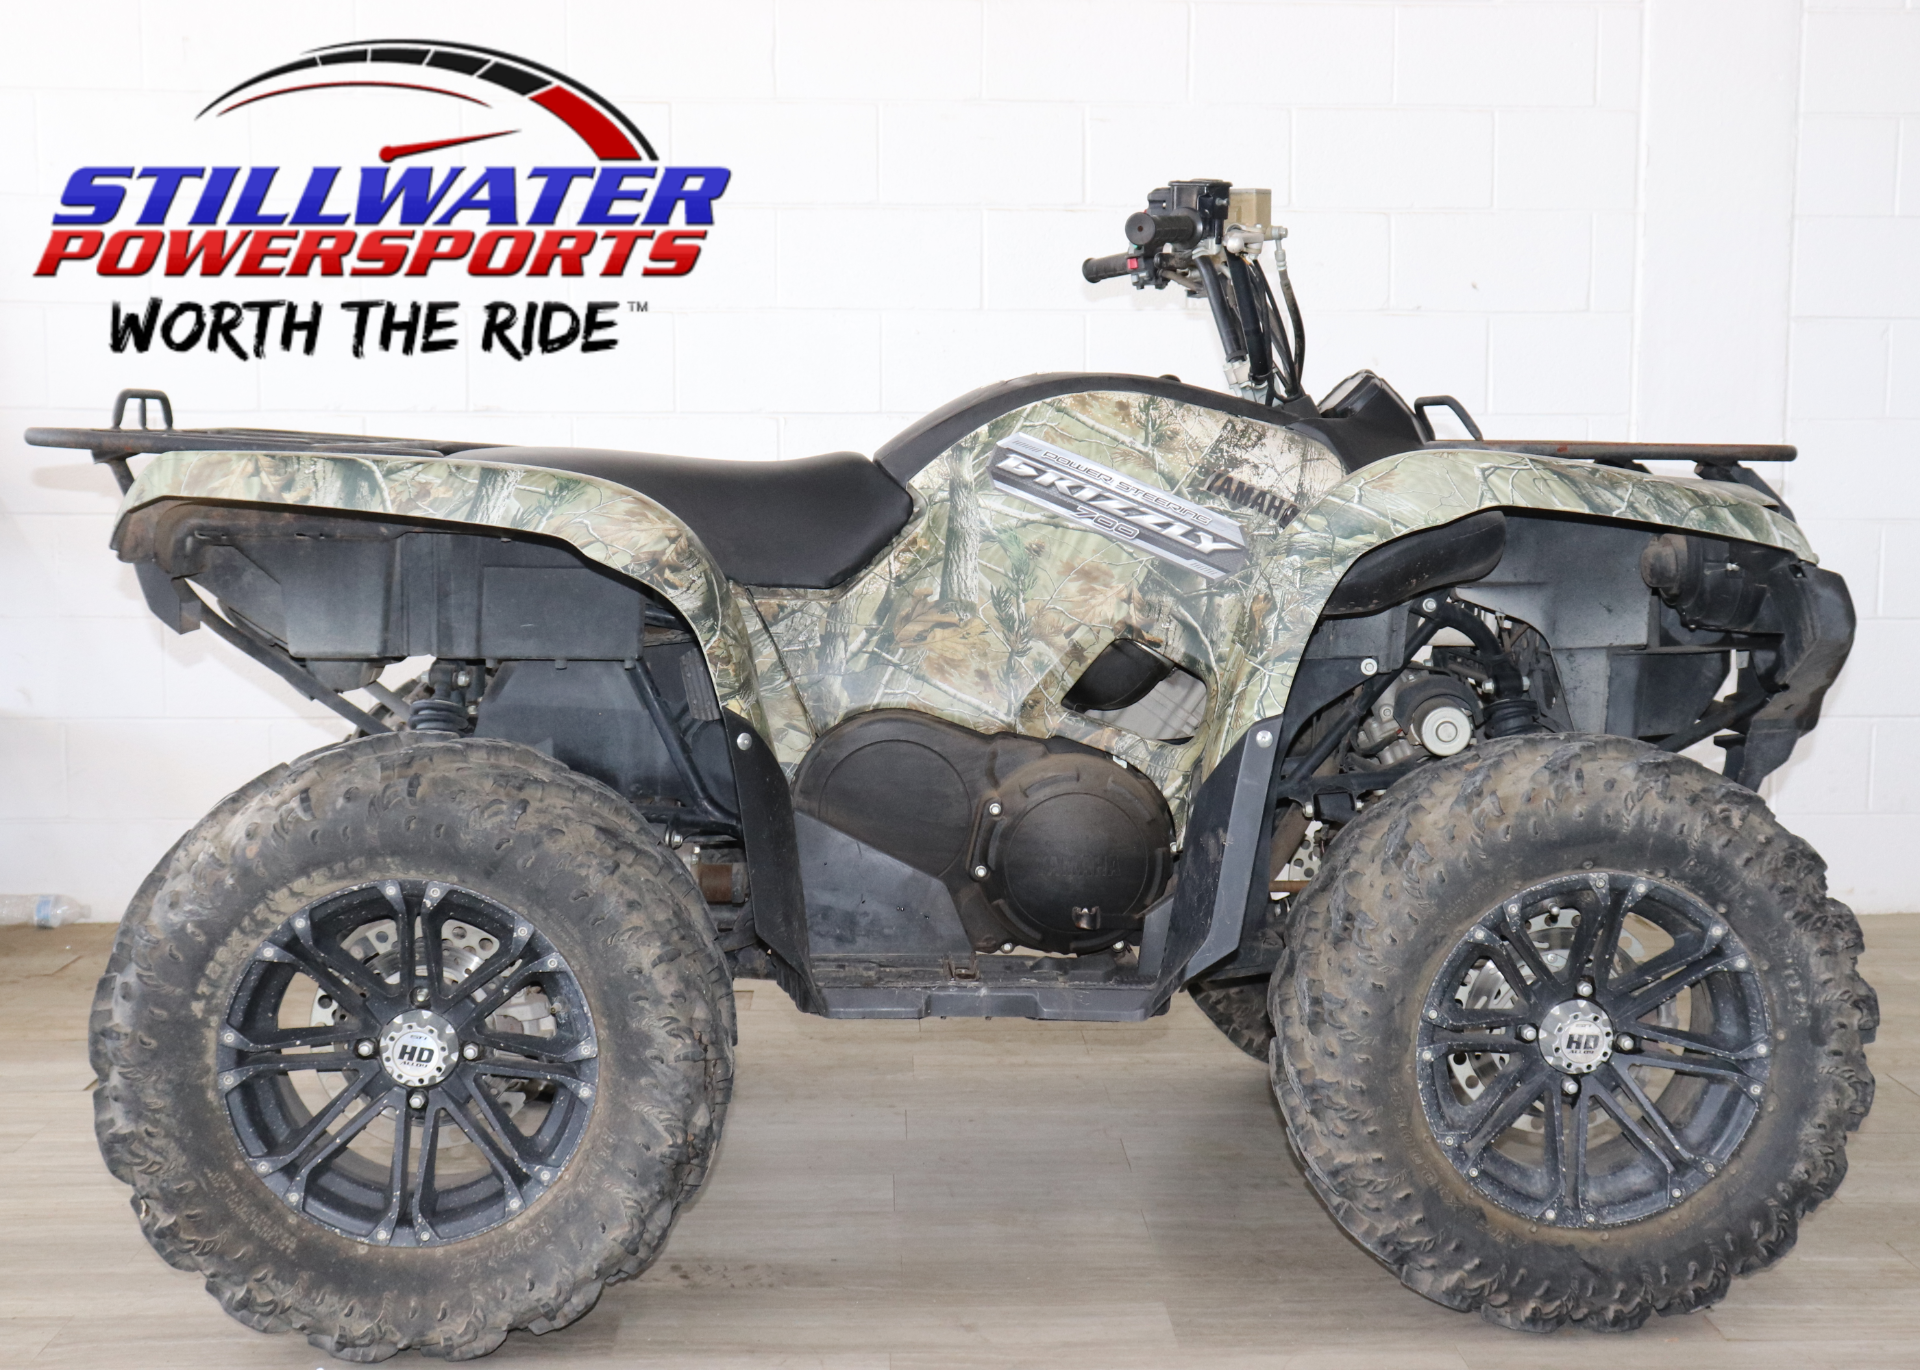 2013 Yamaha Grizzly 700 in Stillwater, Oklahoma - Photo 1